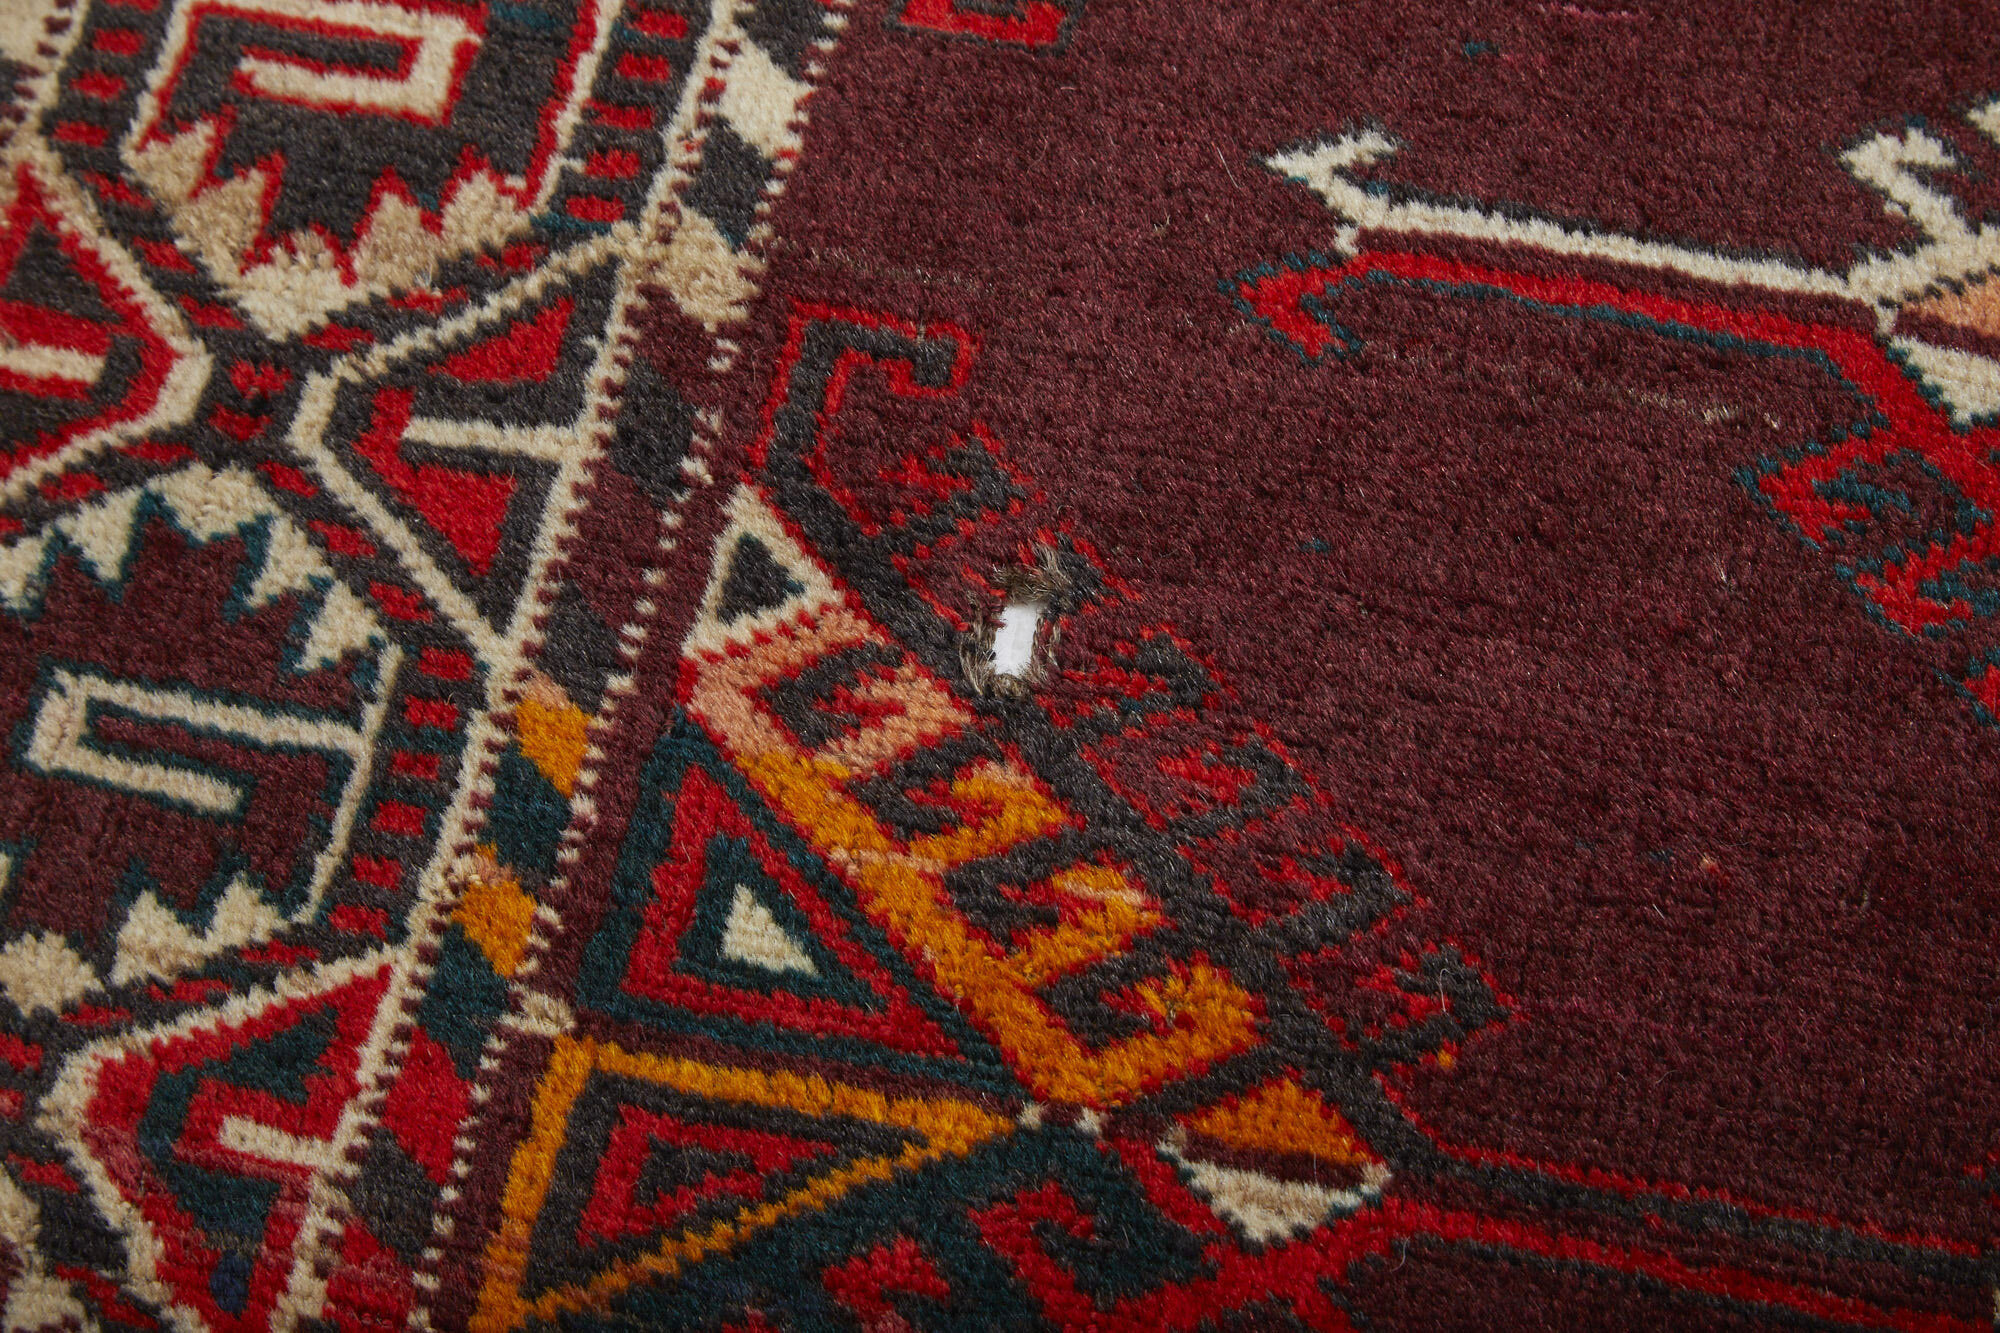 Antique Persian And Navajo Rugs, Persian Rugs In Los Angeles